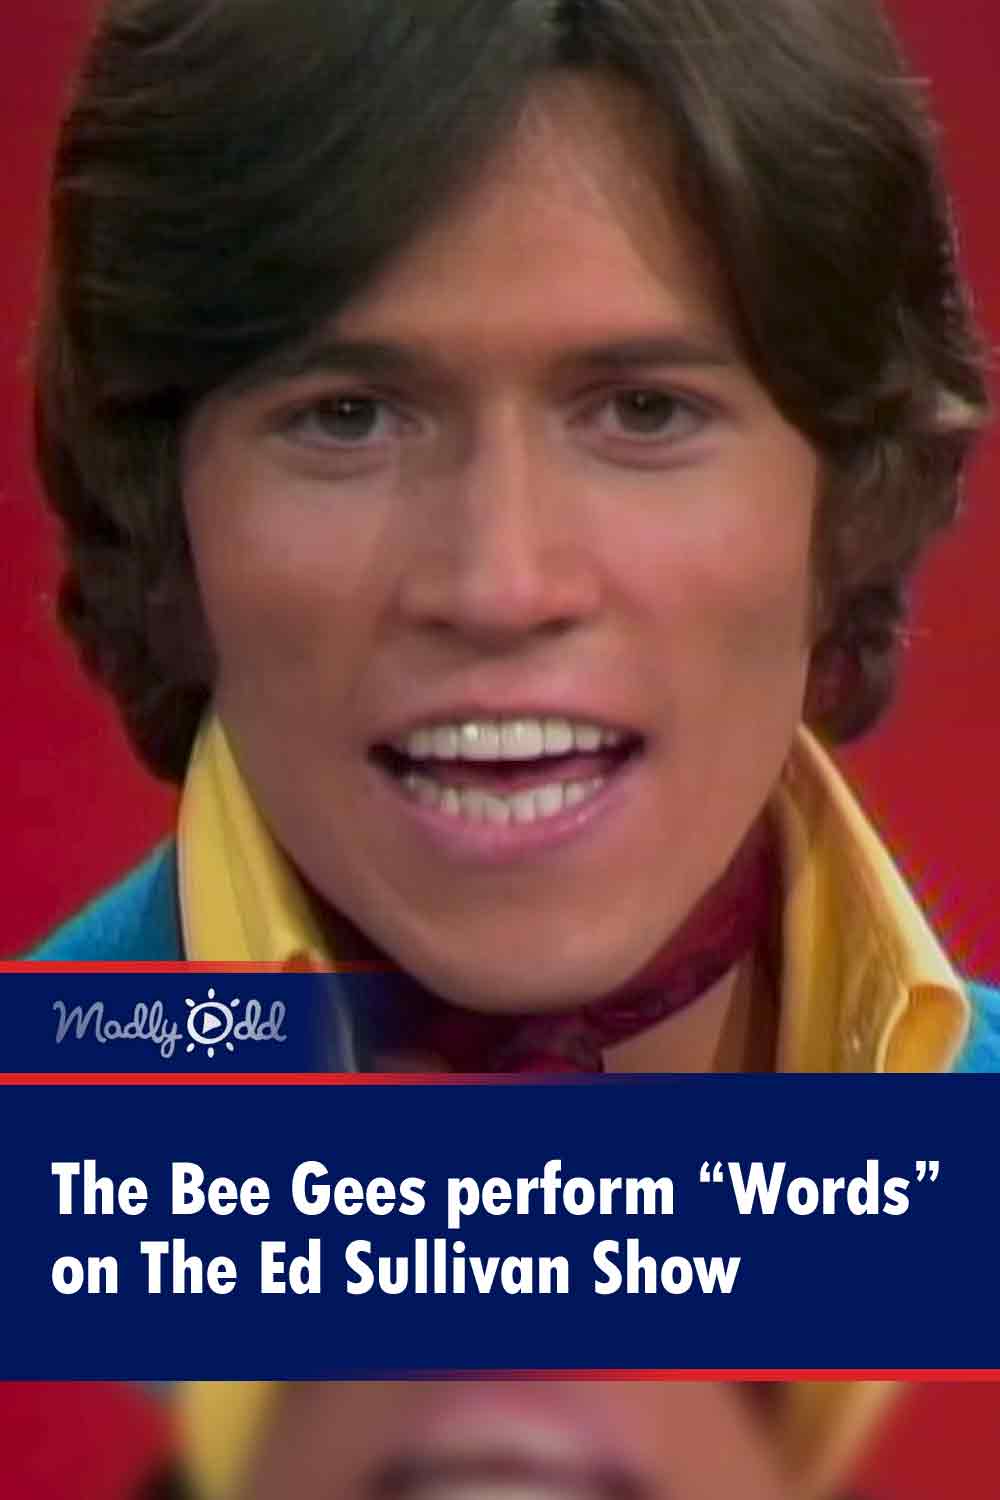 The Bee Gees perform “Words” on The Ed Sullivan Show